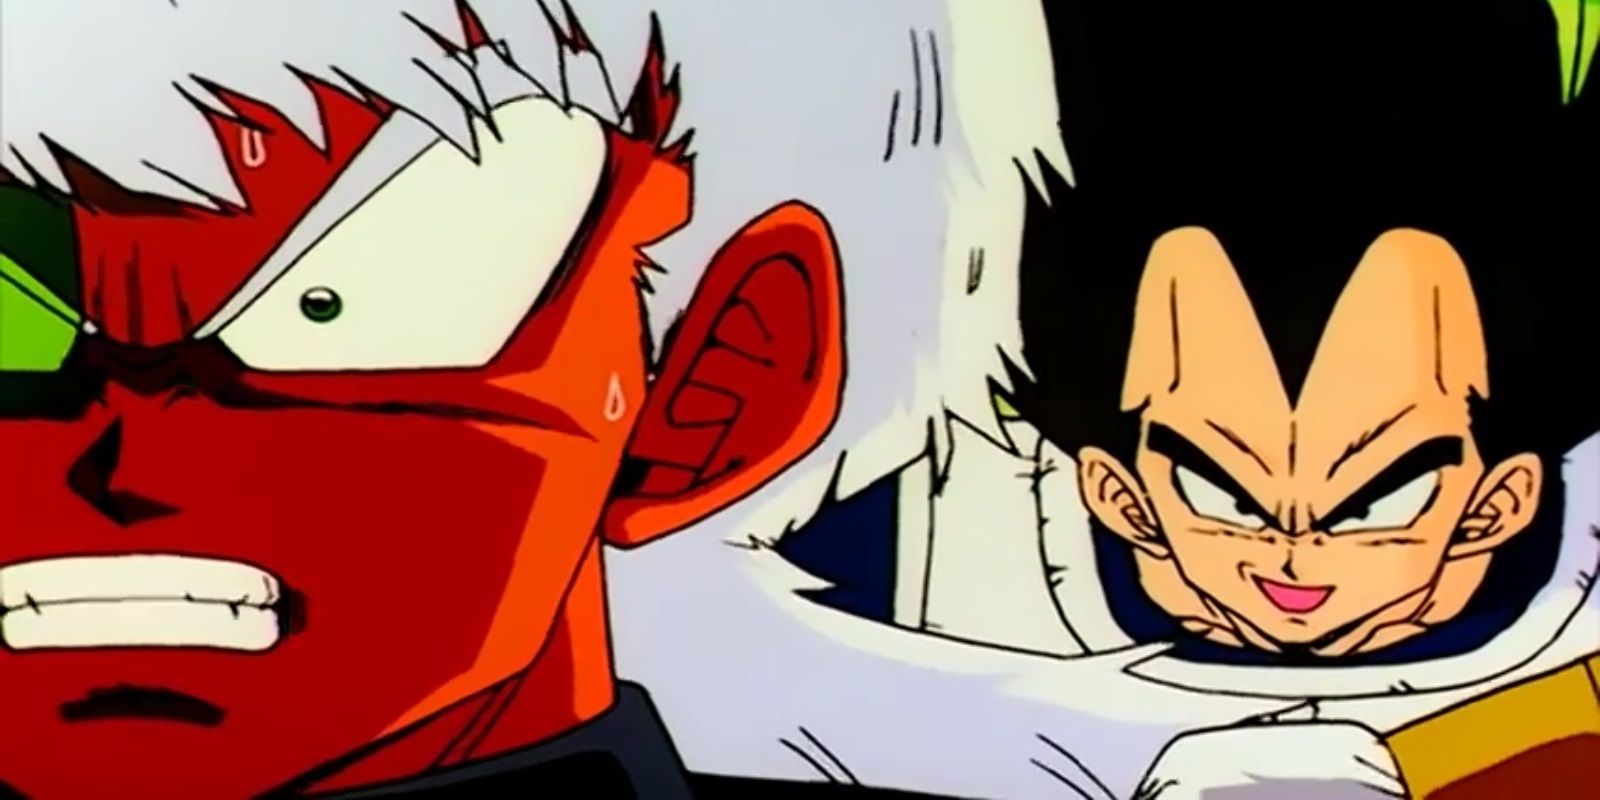 Vegeta challenges Jeice of the Ginyu Force in Dragon Ball Z